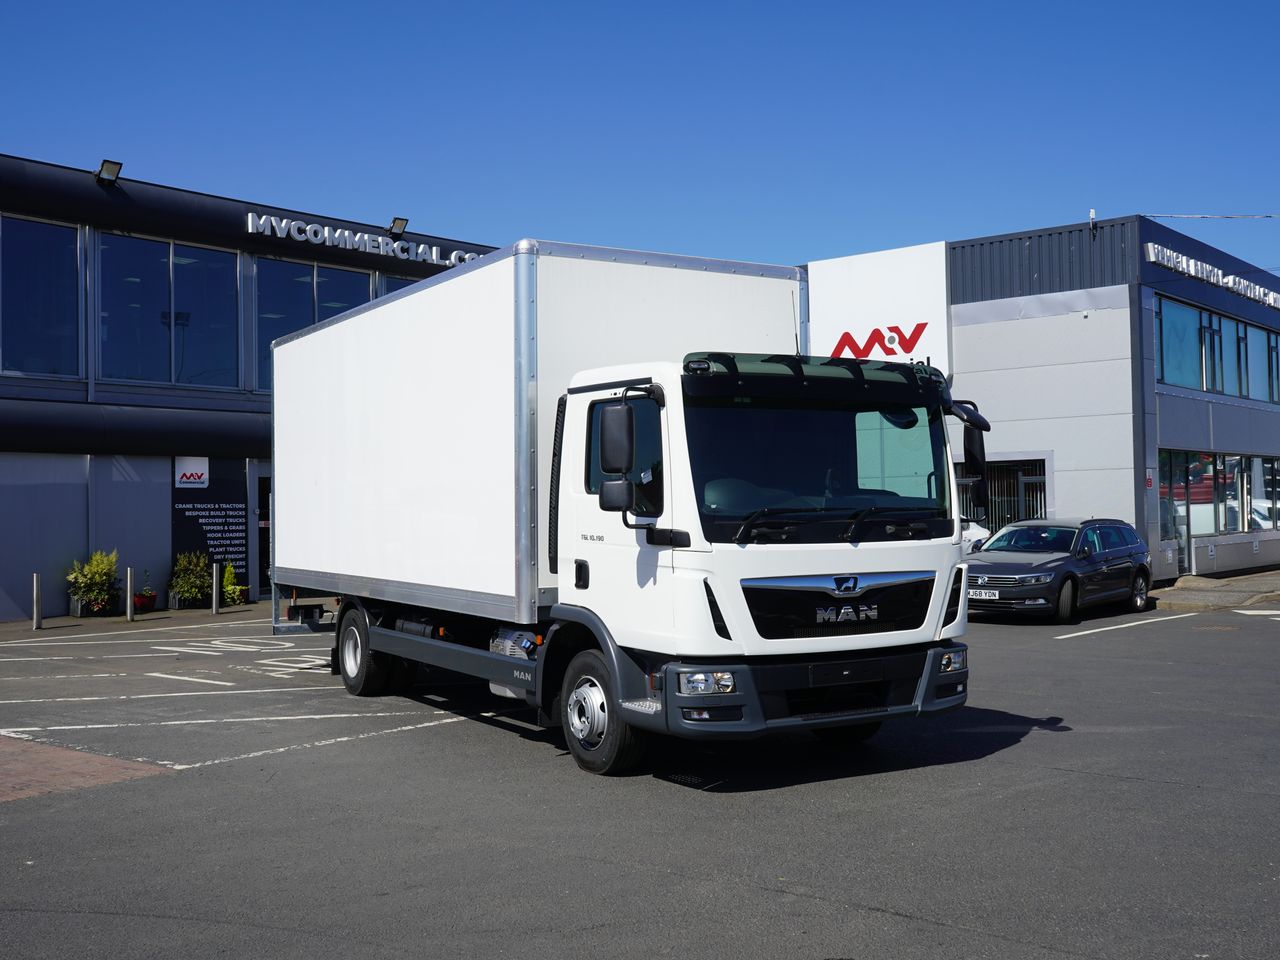 Ready to go MAN TGL 10.190, Box, 190, 7.5 Tonne, Day Cab, Automatic, Air Conditioning, Anti Lock Brakes (ABS), Bluetooth/AUX/USB Dashboard Input, Cab Sunvisor , Electric Windows, , -, - | for sale at MV Commercial, the UKs leading Truck, Trailers and Van supplier. (SL69THN 39564)